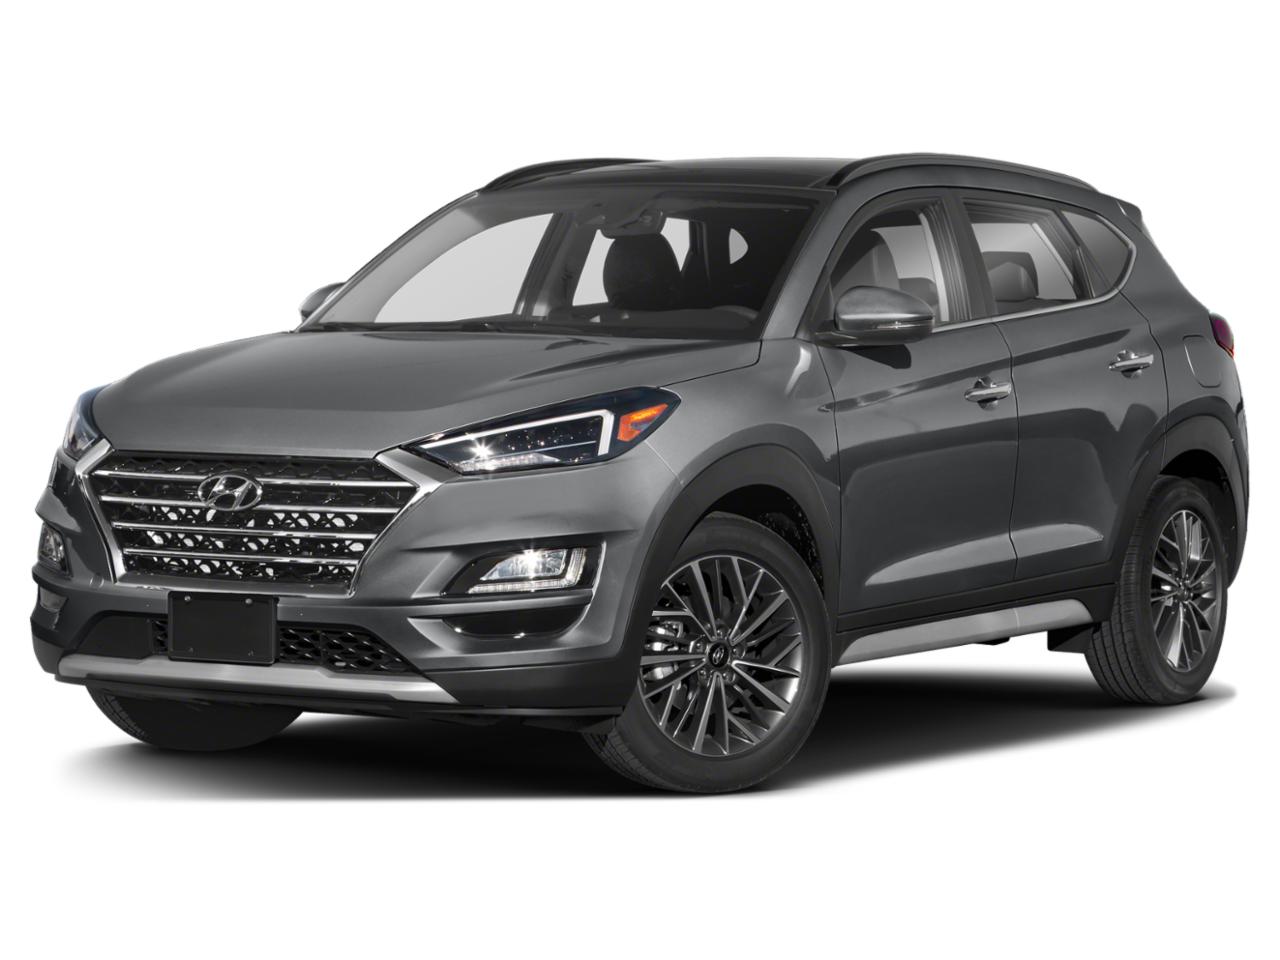 New 2021 Hyundai Tucson Ultimate AWD for Sale in ...